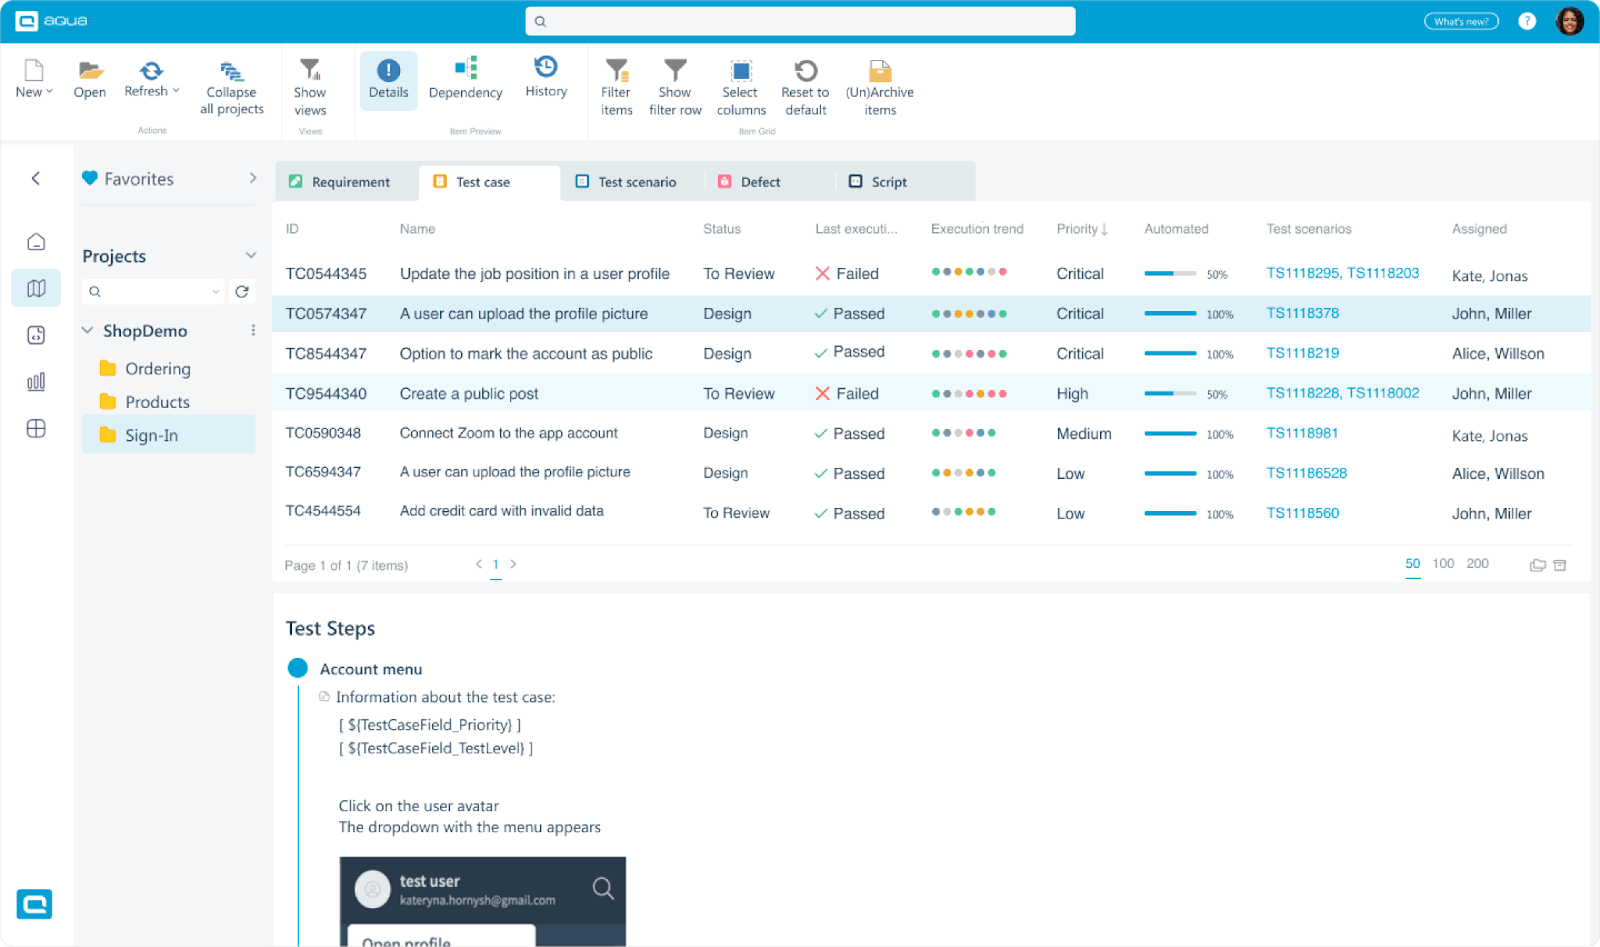 Web-based test management system with collaboration features